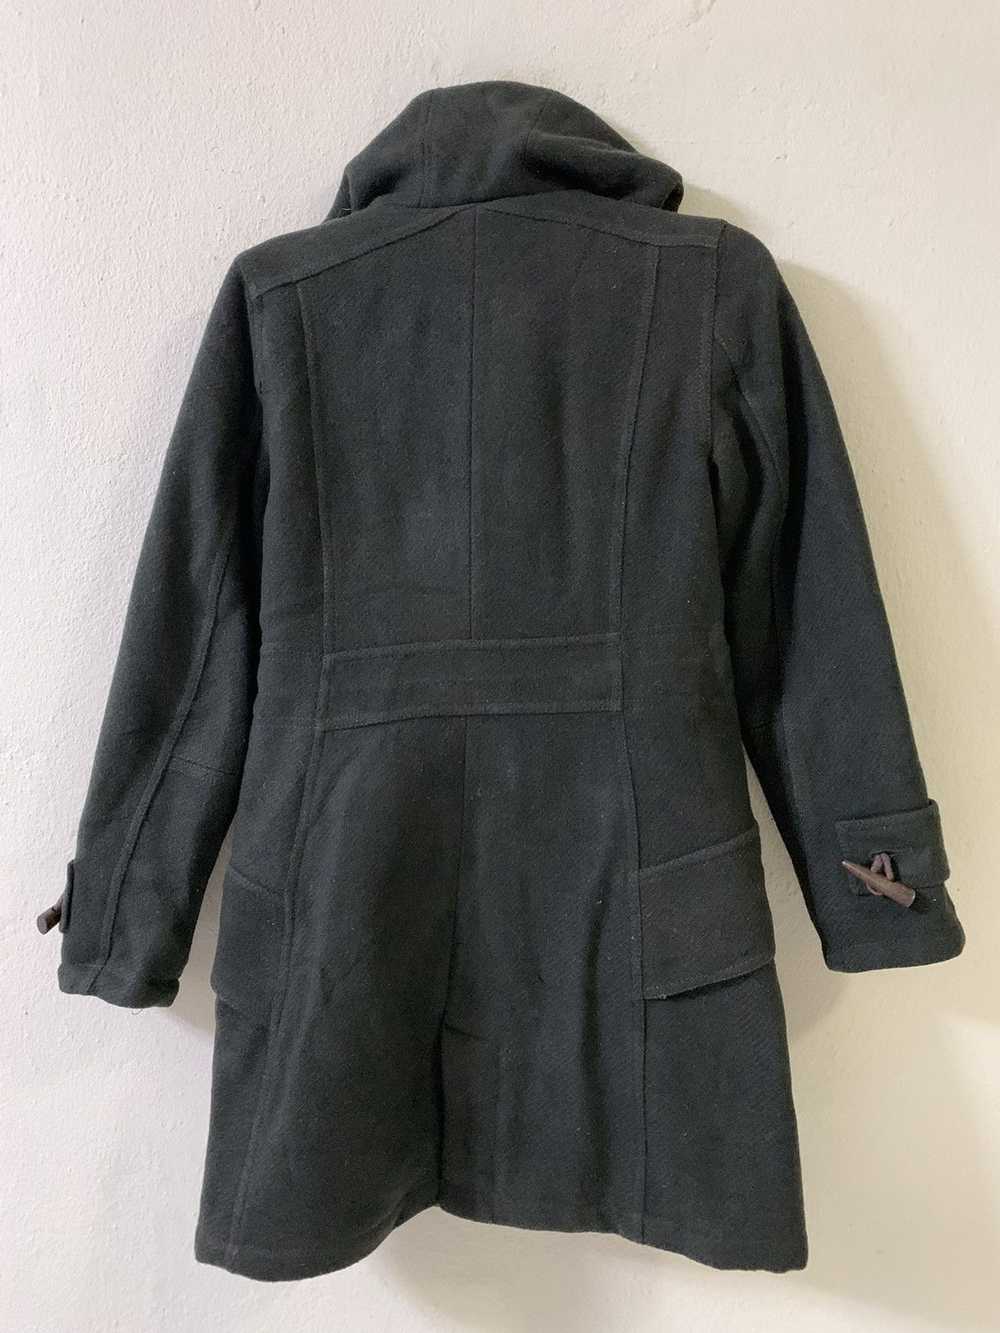 I. Spiewak And Sons I. Spiewak & Sons Hooded Coat - image 8